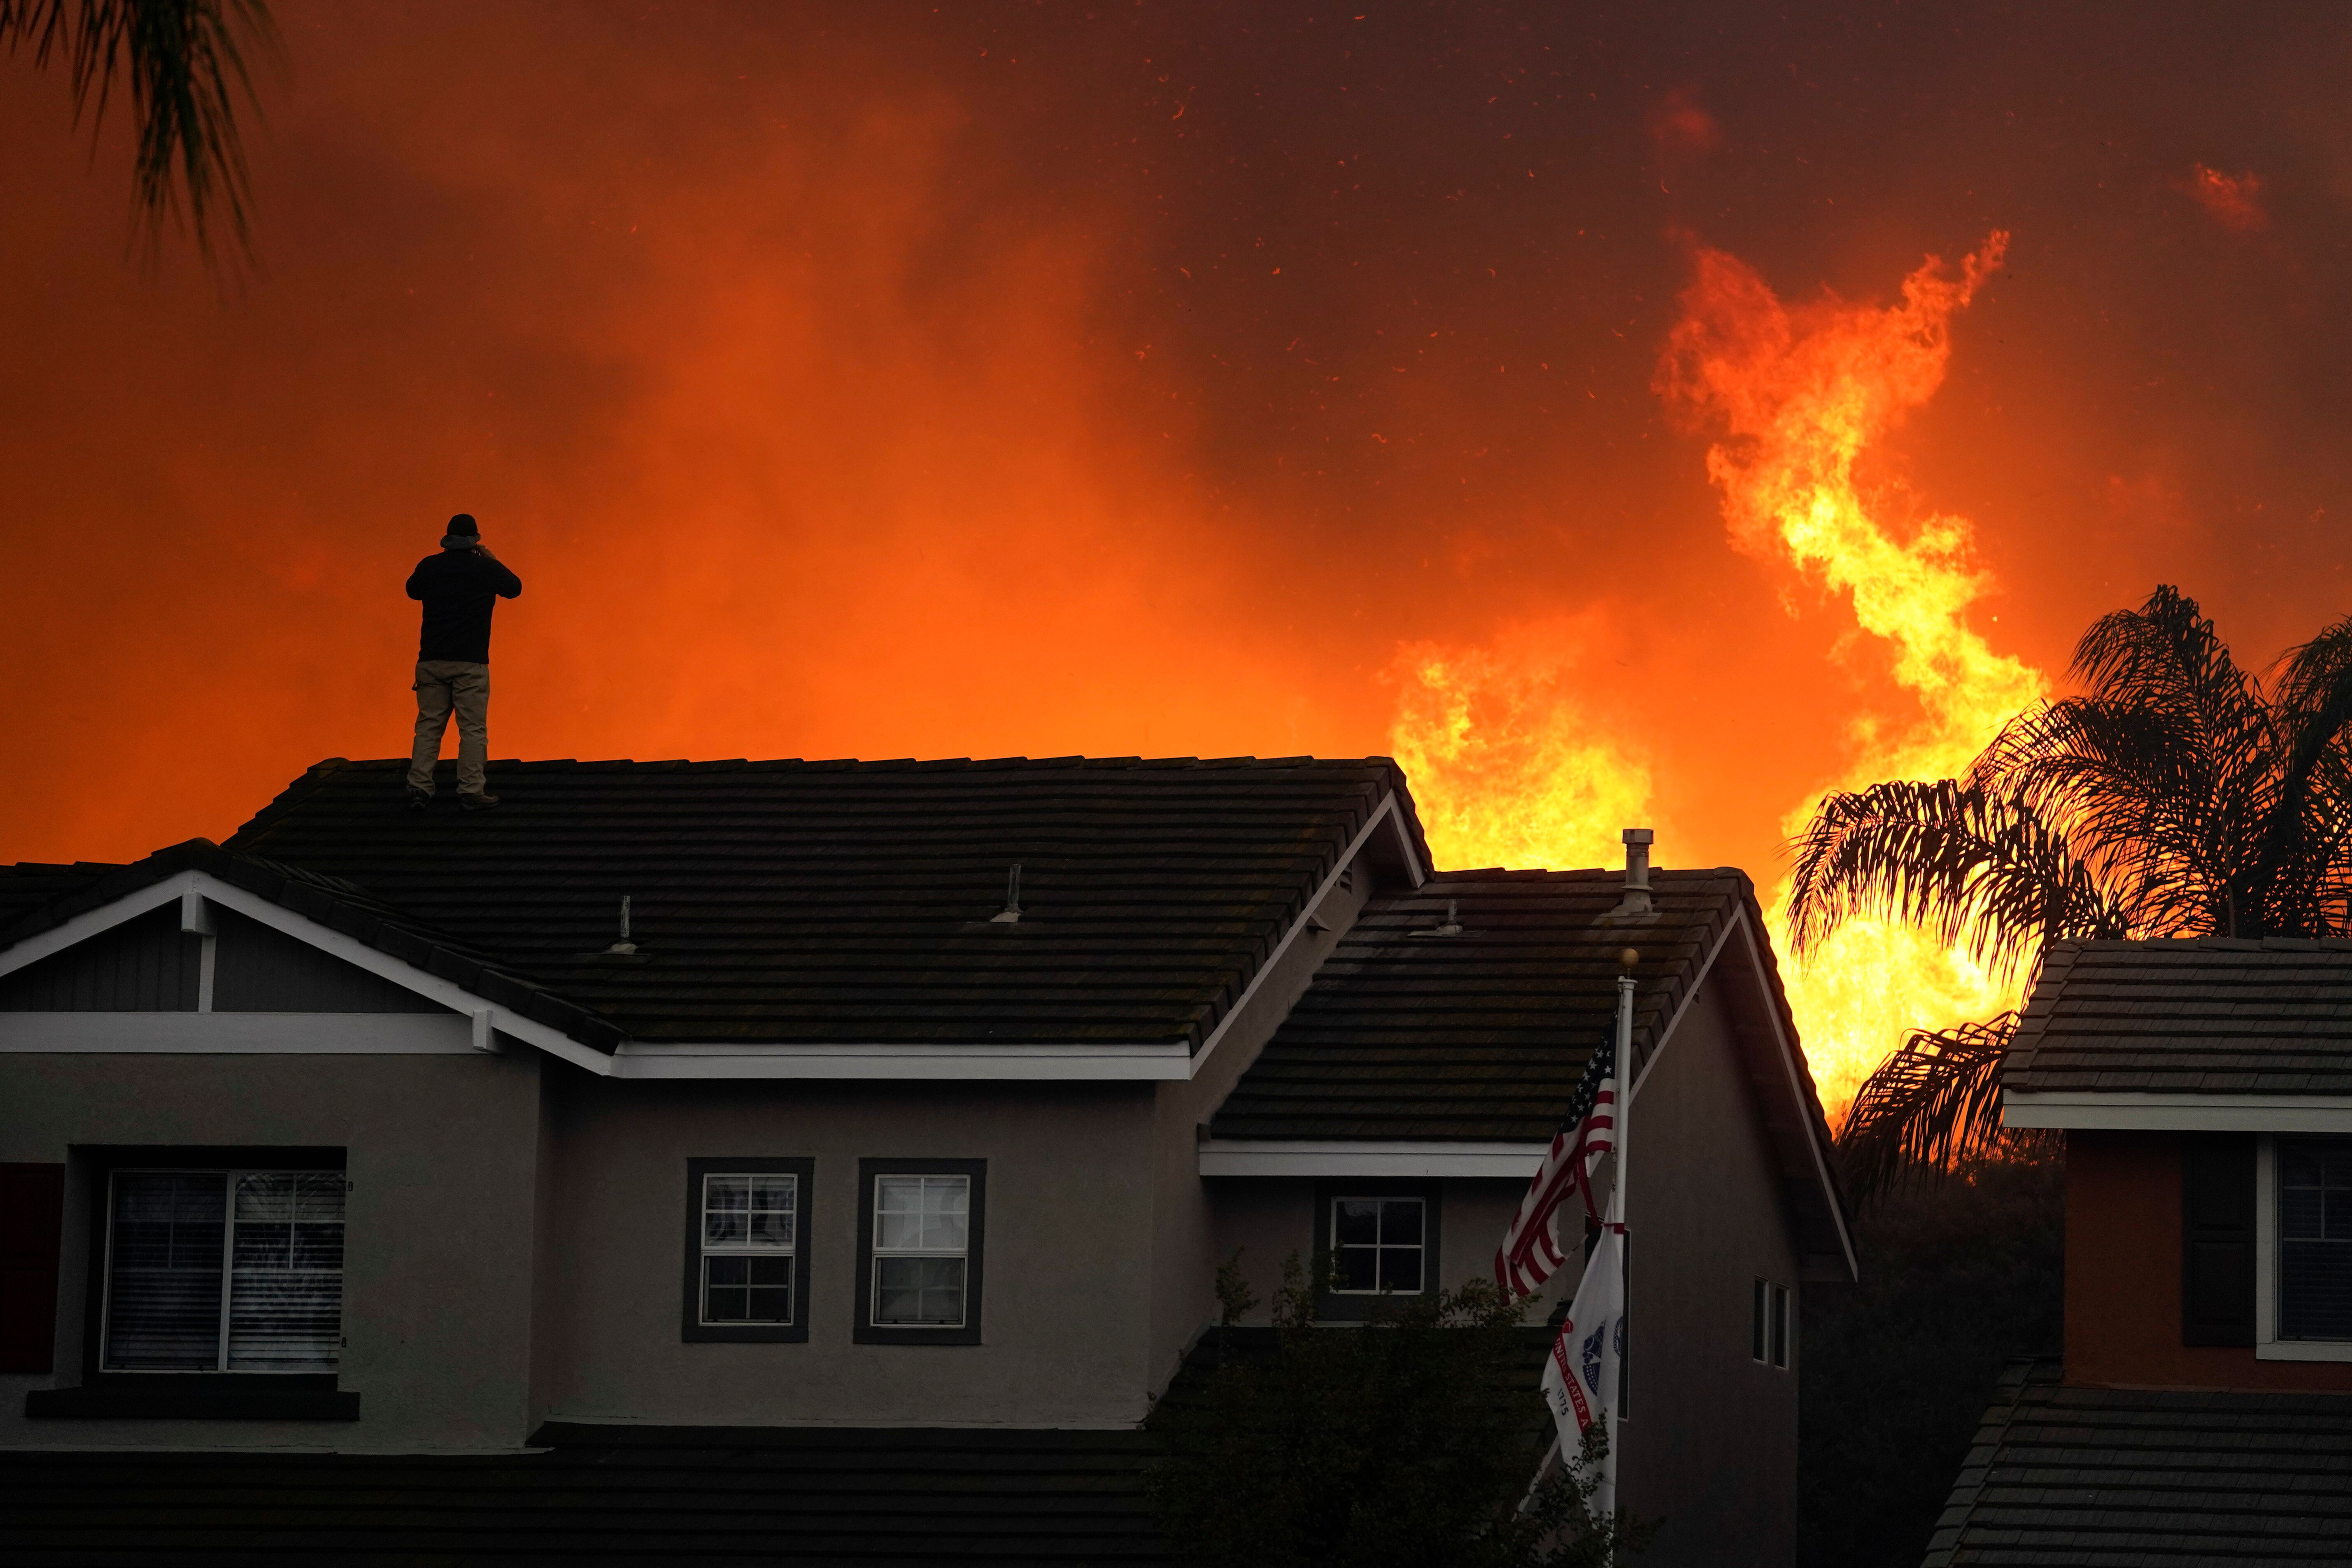 Herman Termeer, 54, stands on the roof of his home as the Blue Ridge Fire burns along the hillside in Chino Hills, Calif., on